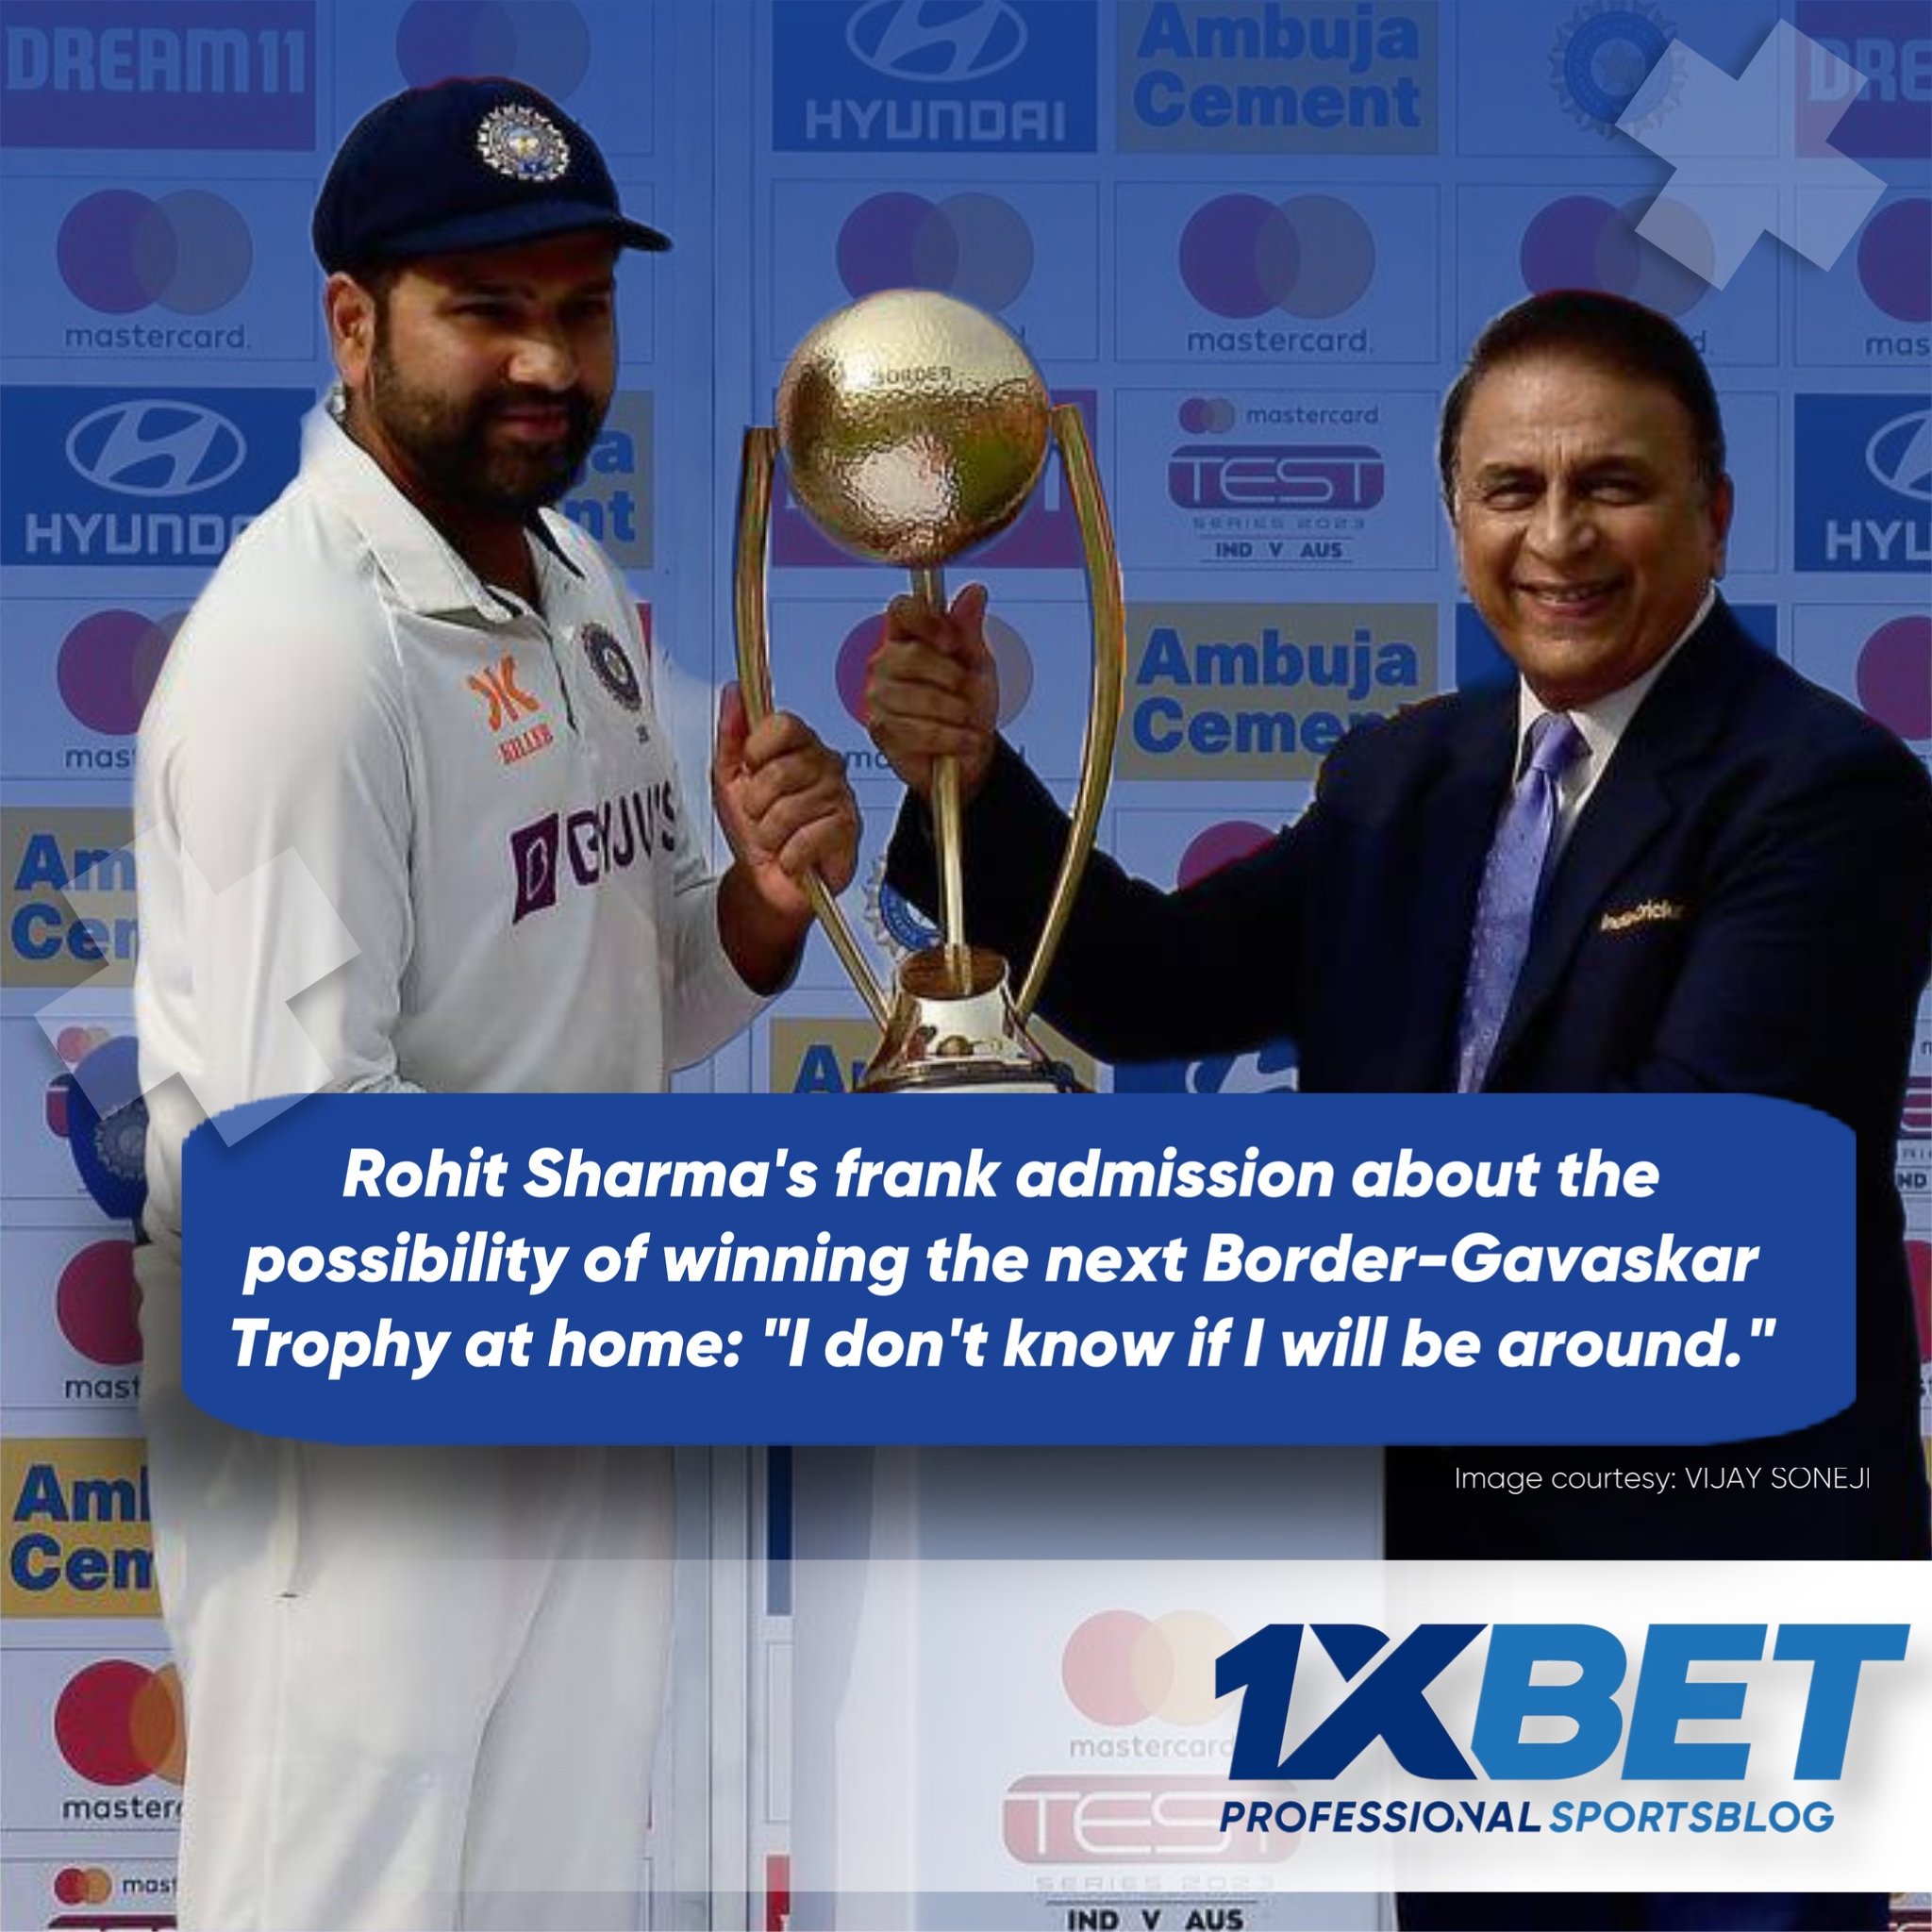 Rohit Sharma's frank admission about the possibility of winning the next Border-Gavaskar Trophy at home: "I don't know if I will be around."